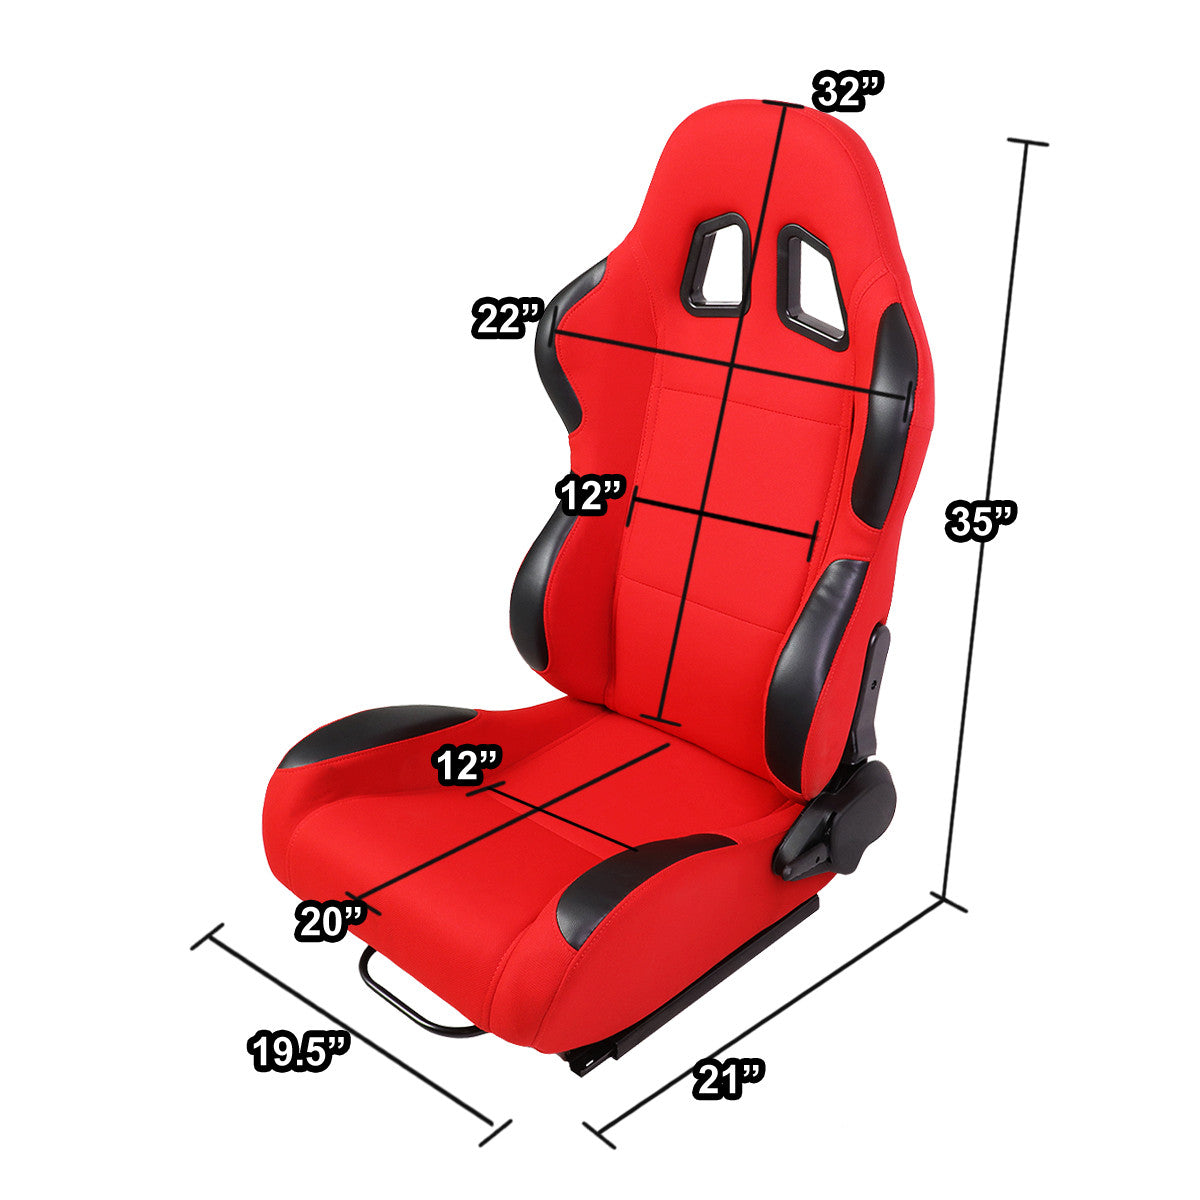 Racing Seats - Reclinable - Woven Fabric - Type-R - Pair